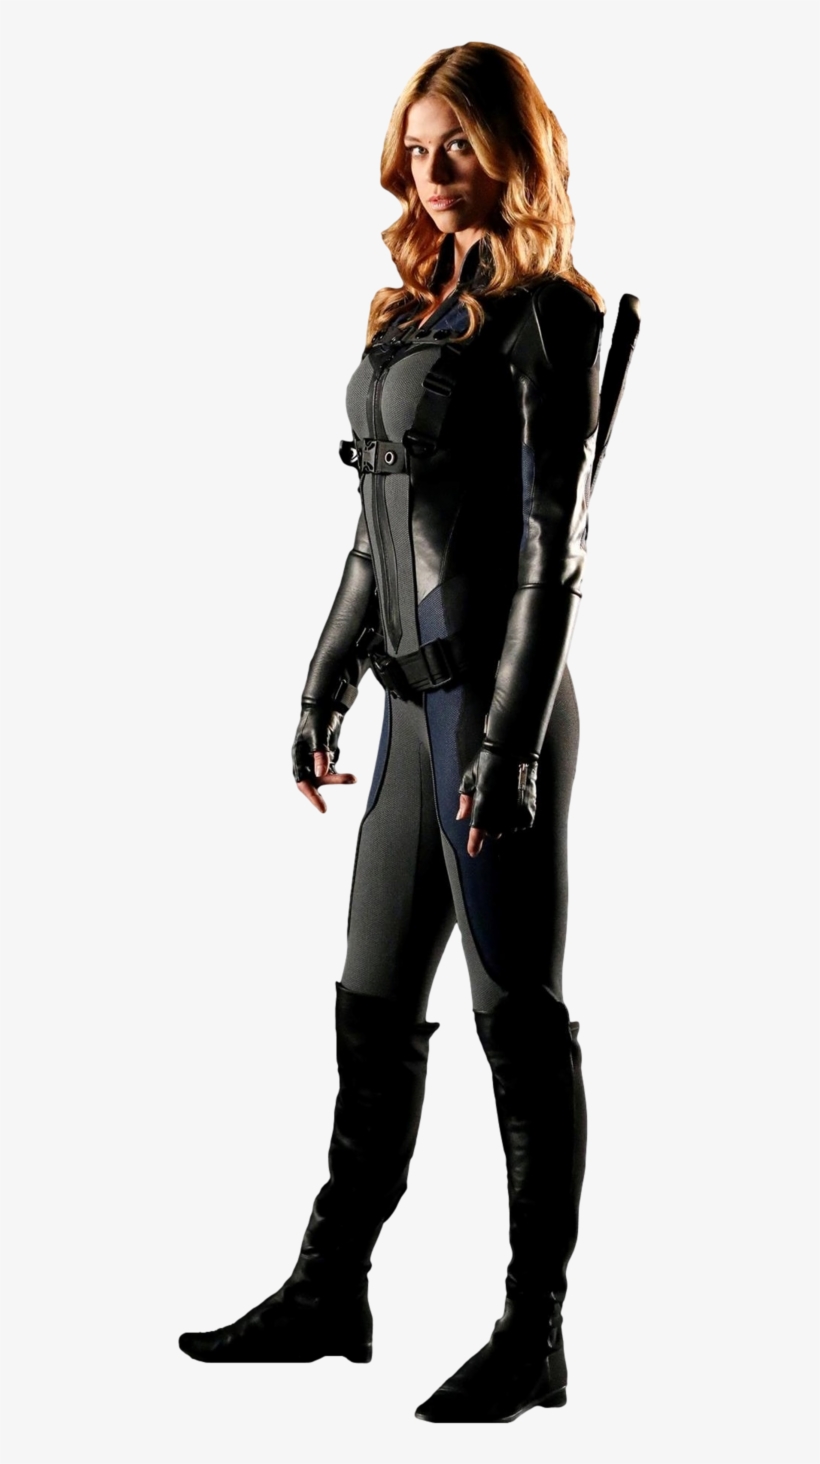 Png Agents Of Shield - Agents Of Shield Mockingbird Png, transparent png #2105449